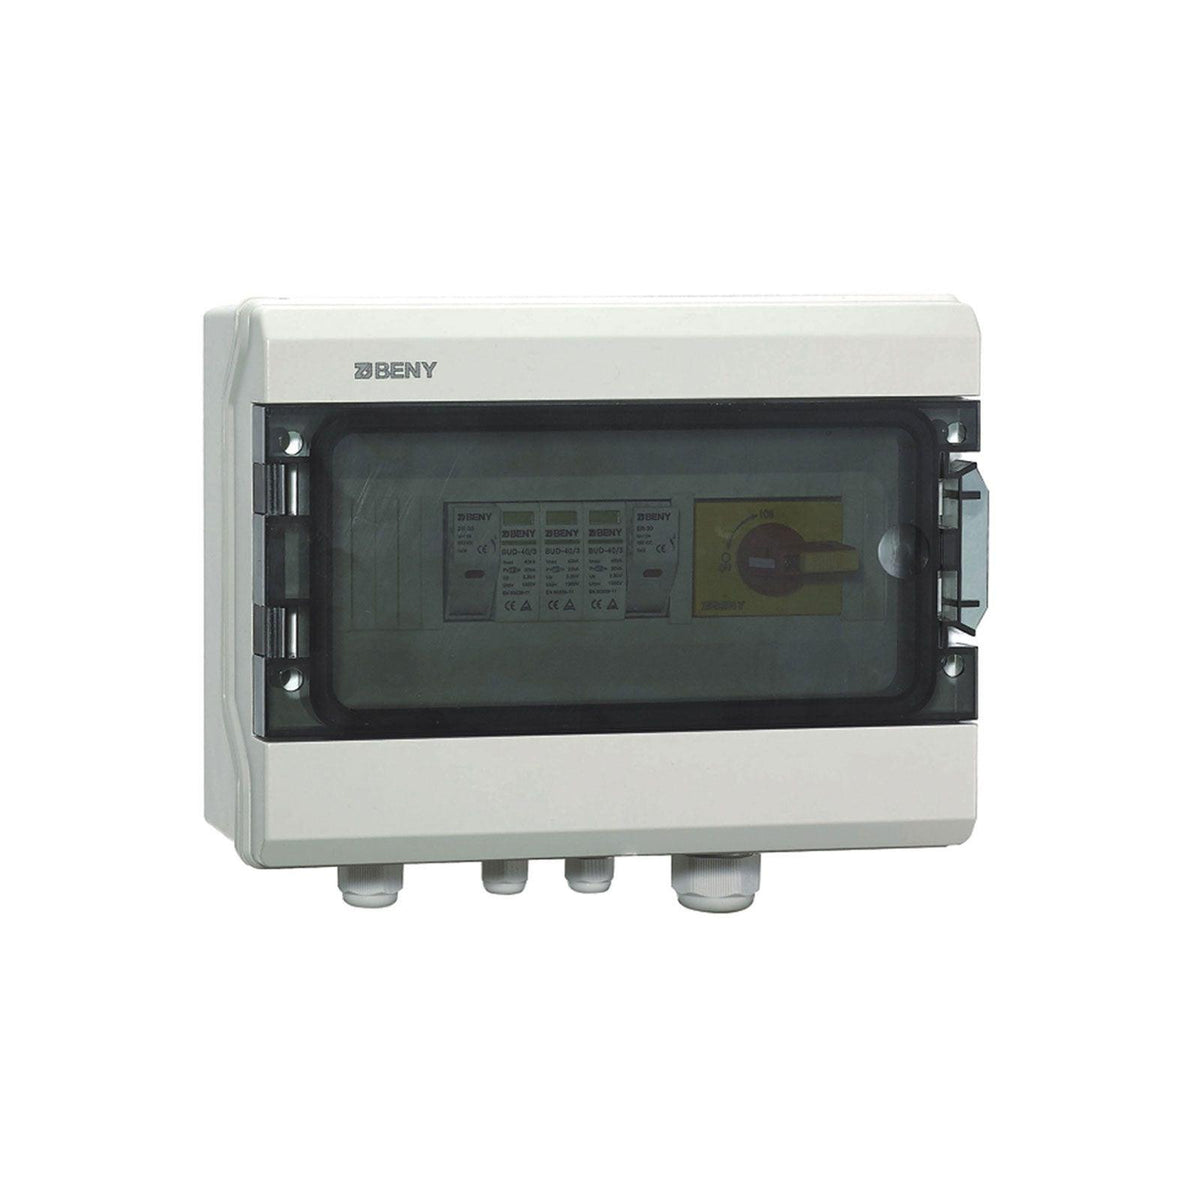 PV Combiner DC Switch Box 1-way Input 1-way Output - VoltaconSolar